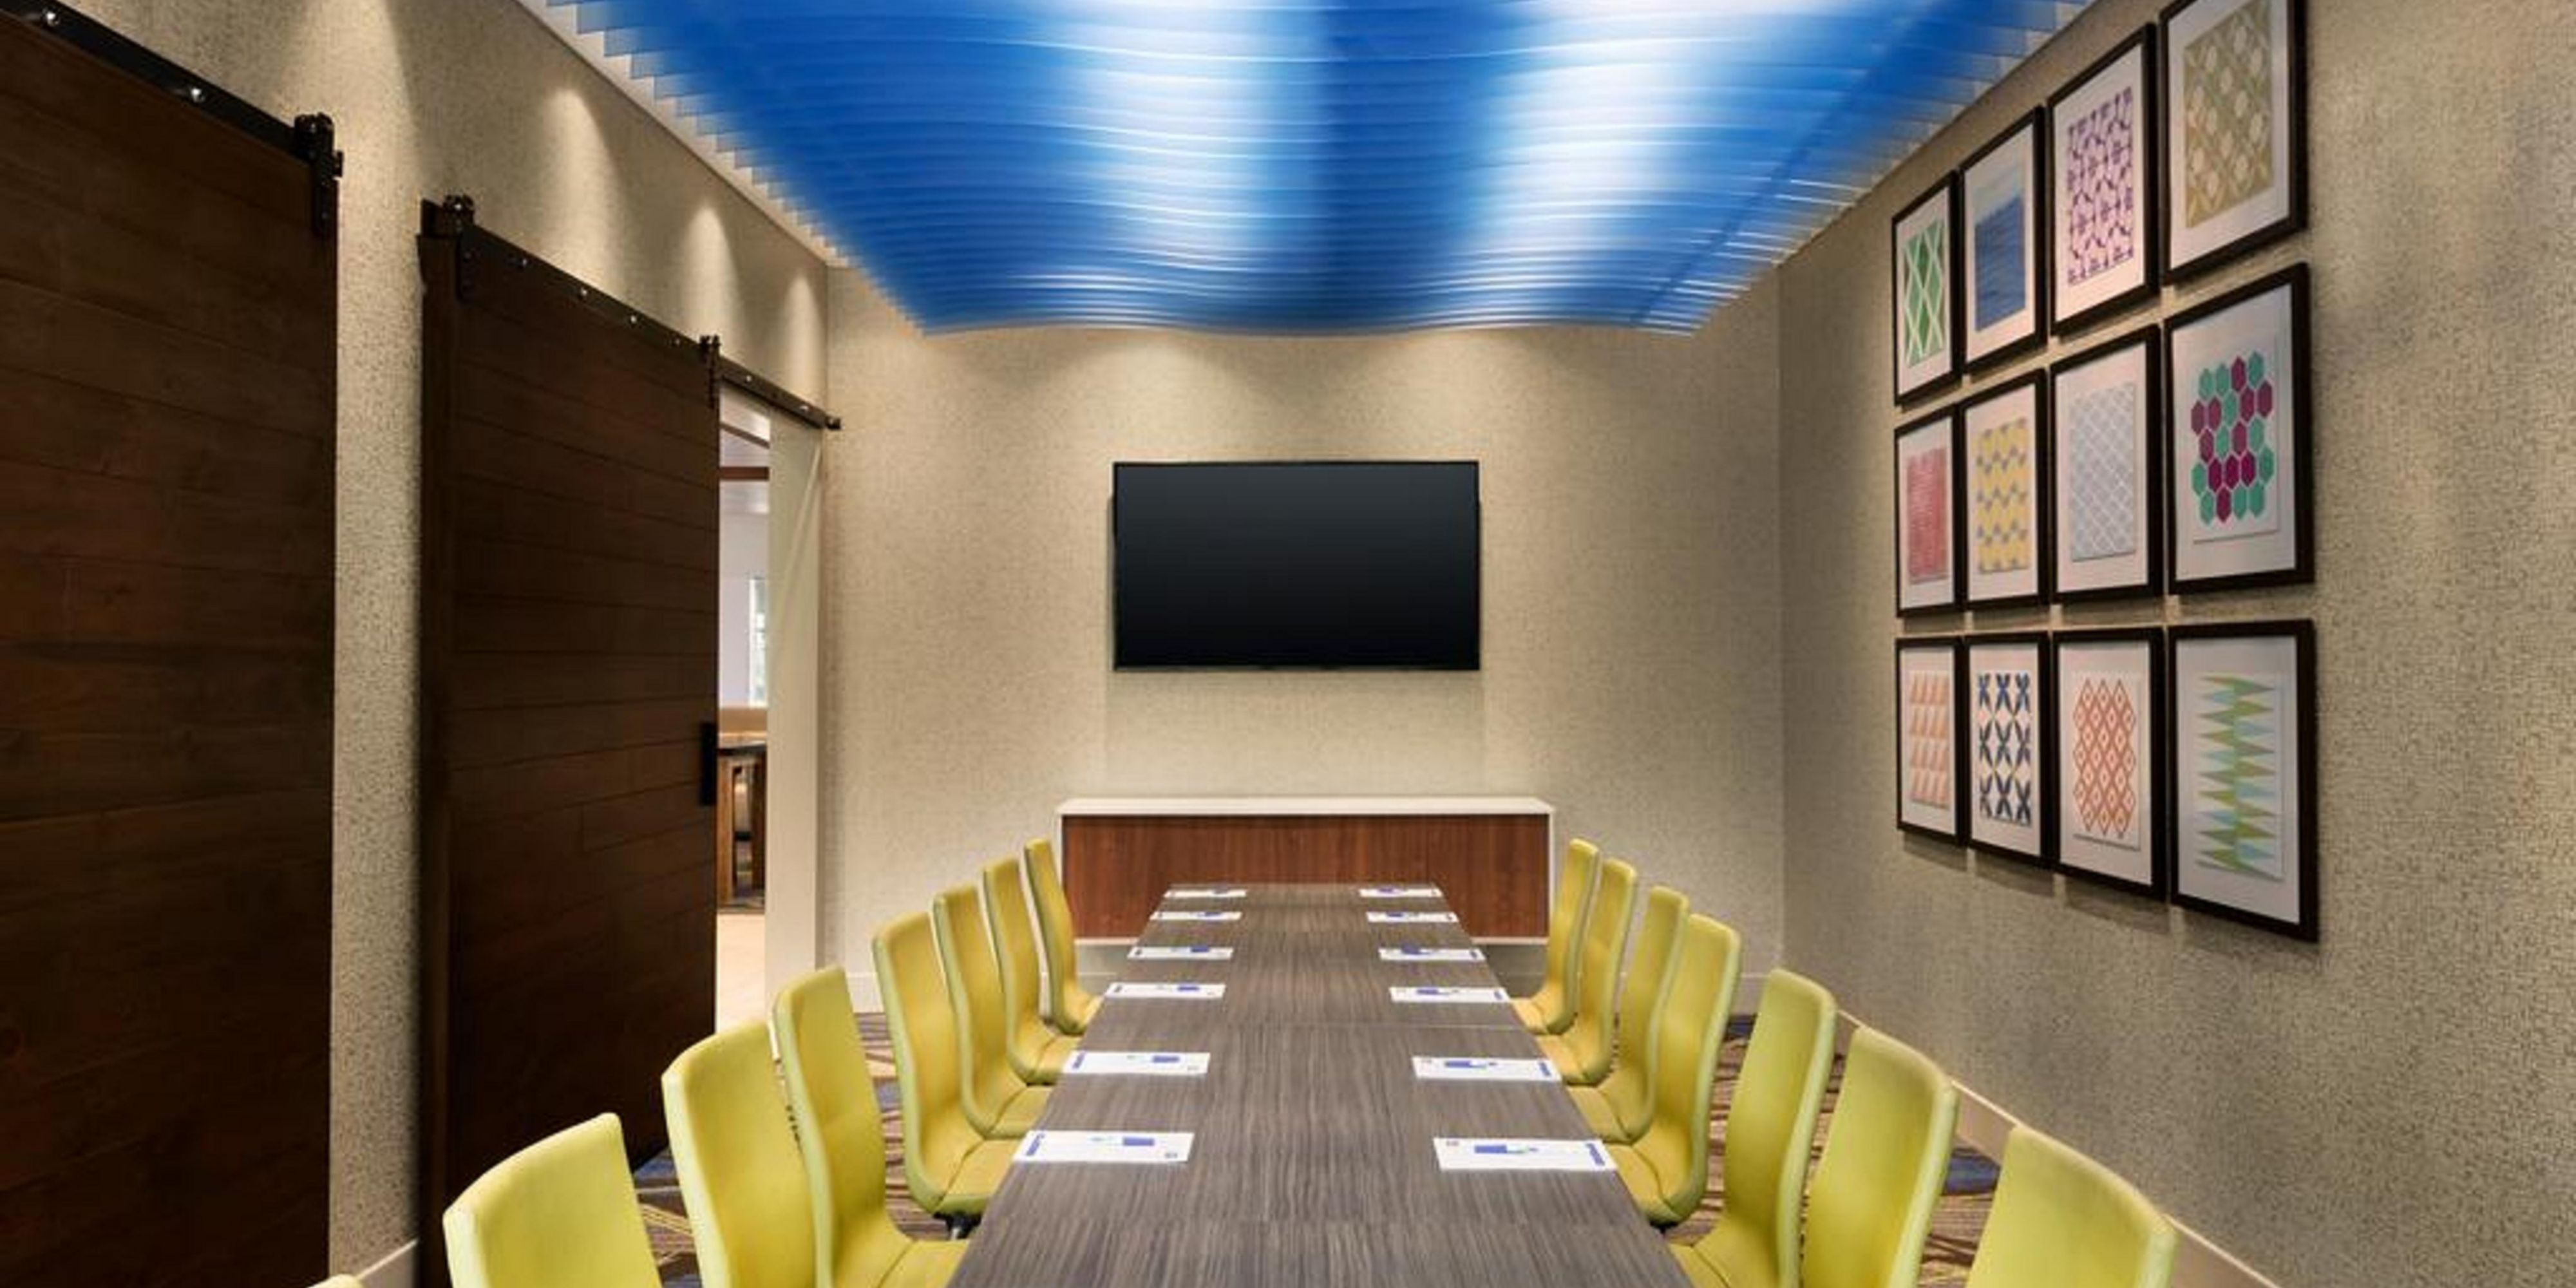 Our modern meeting room is the perfect fit for your next meeting or get together.